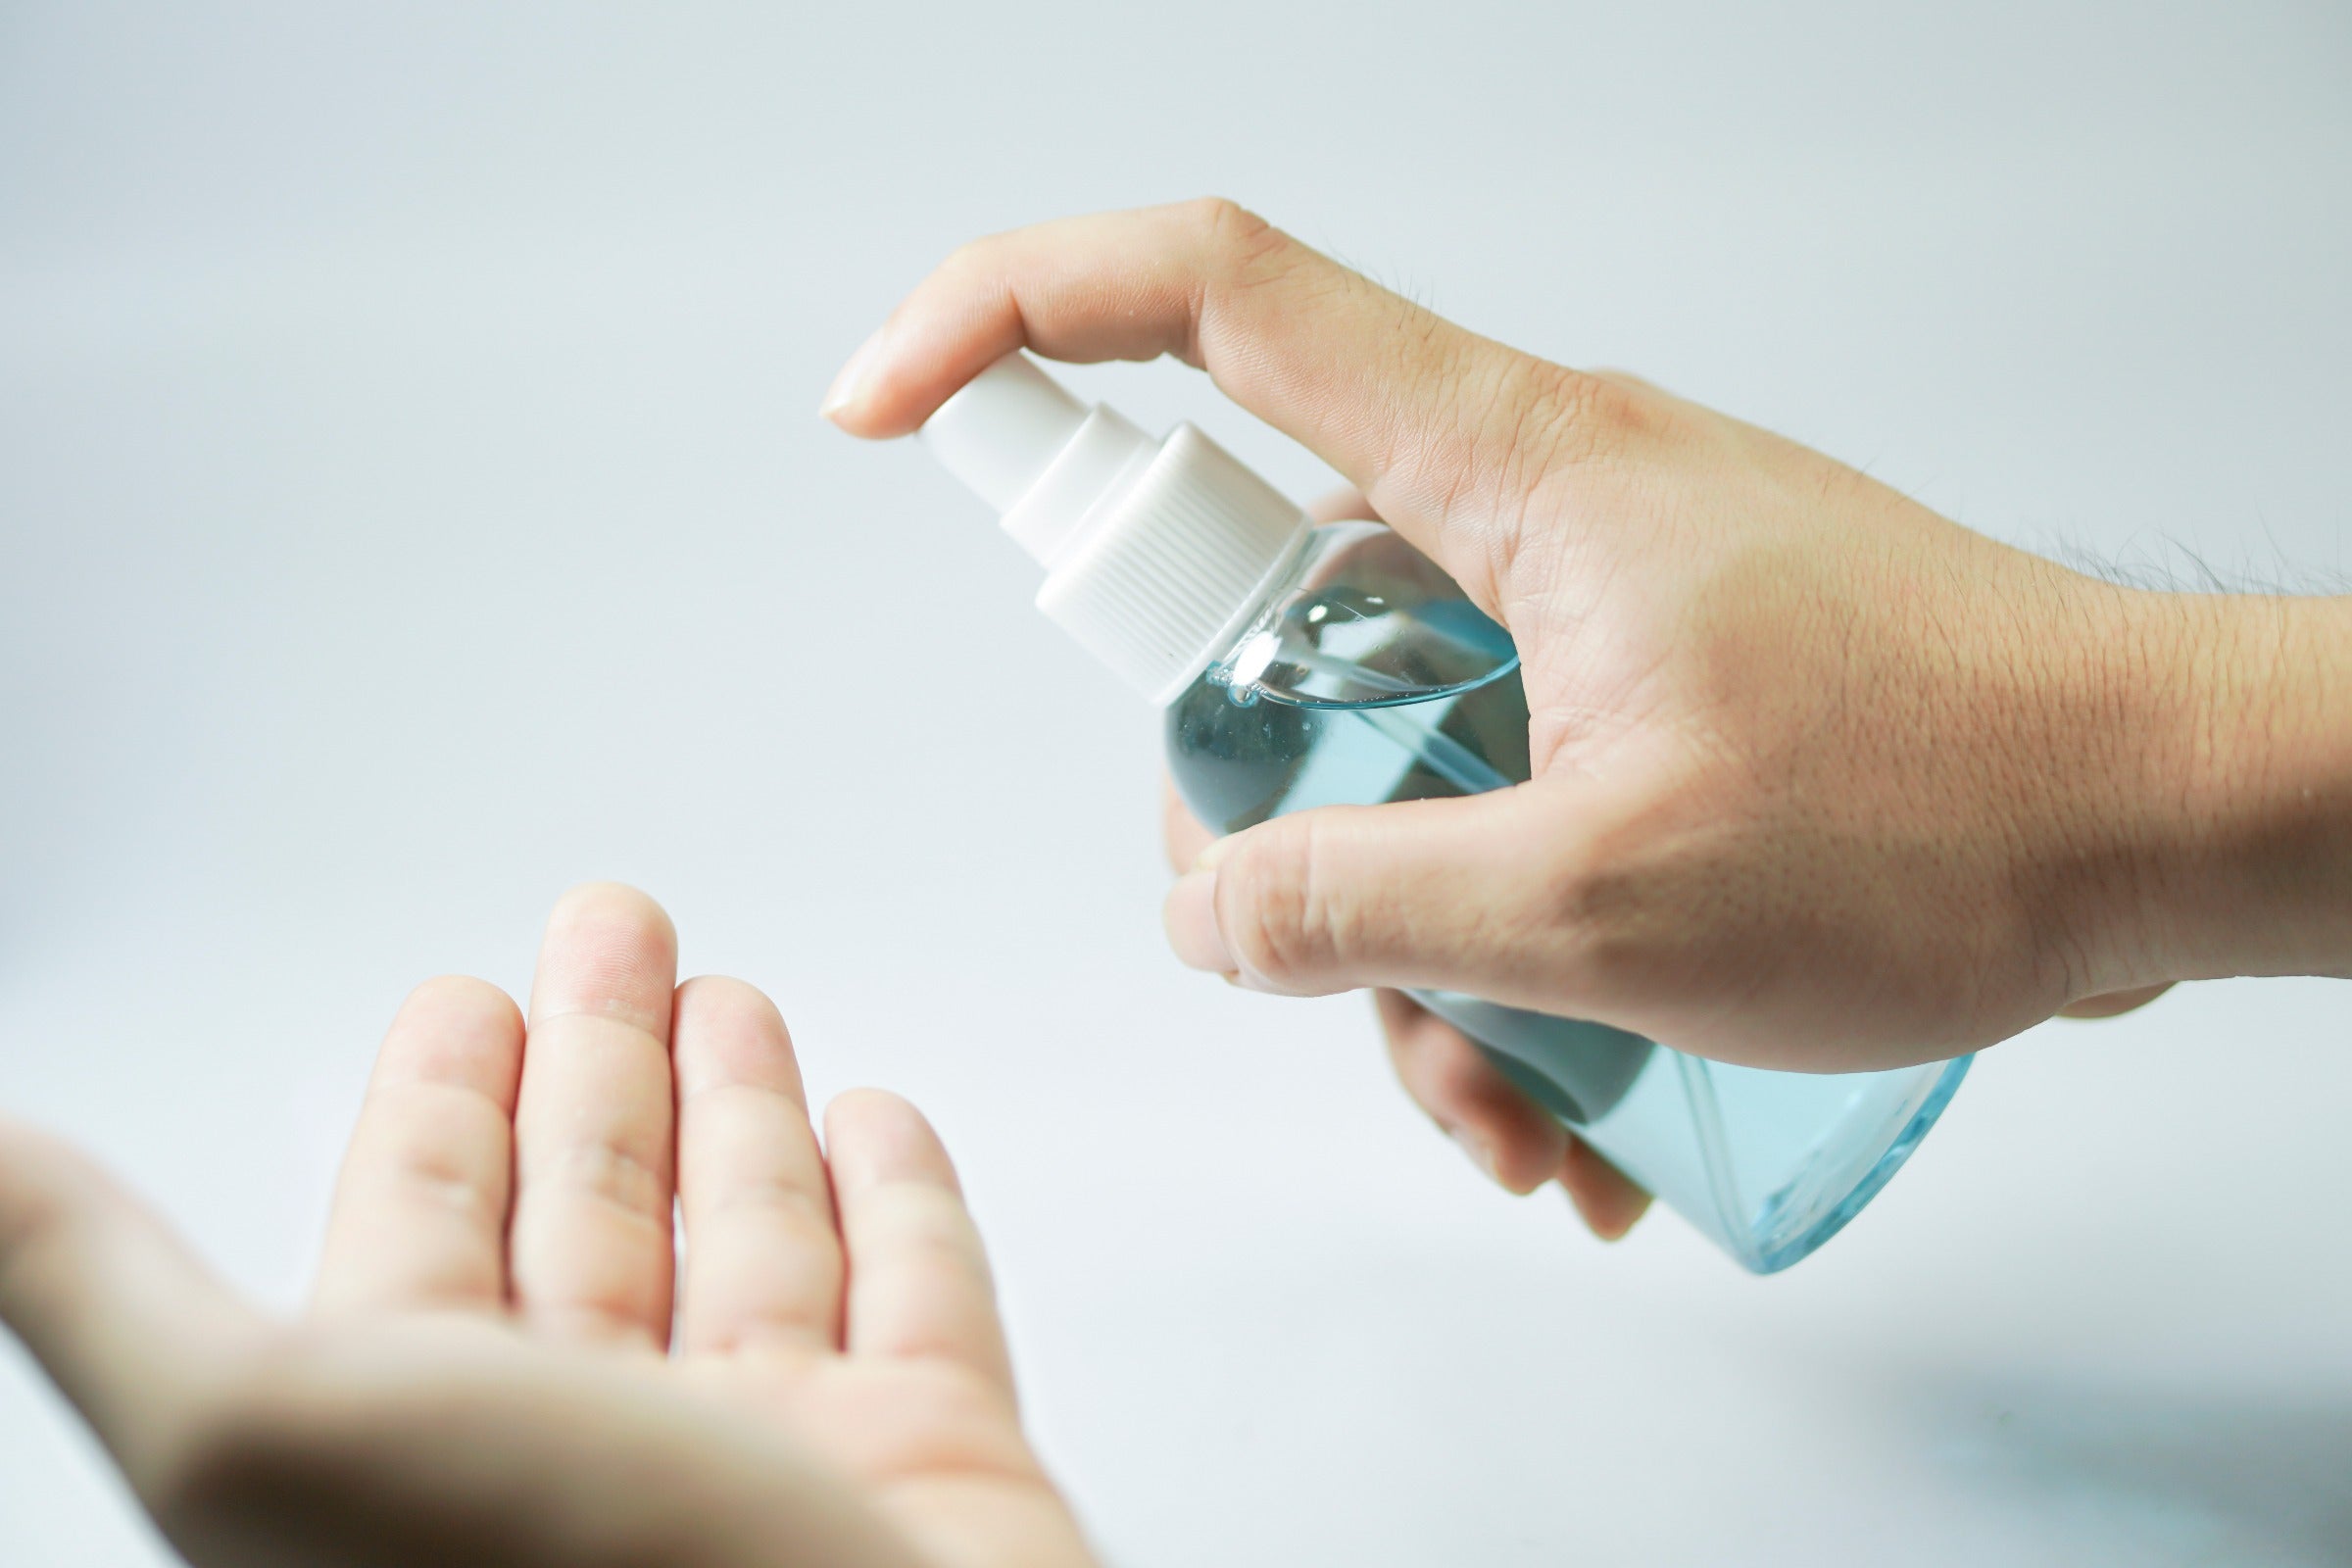 An alcohol-free hand sanitizer for wounds